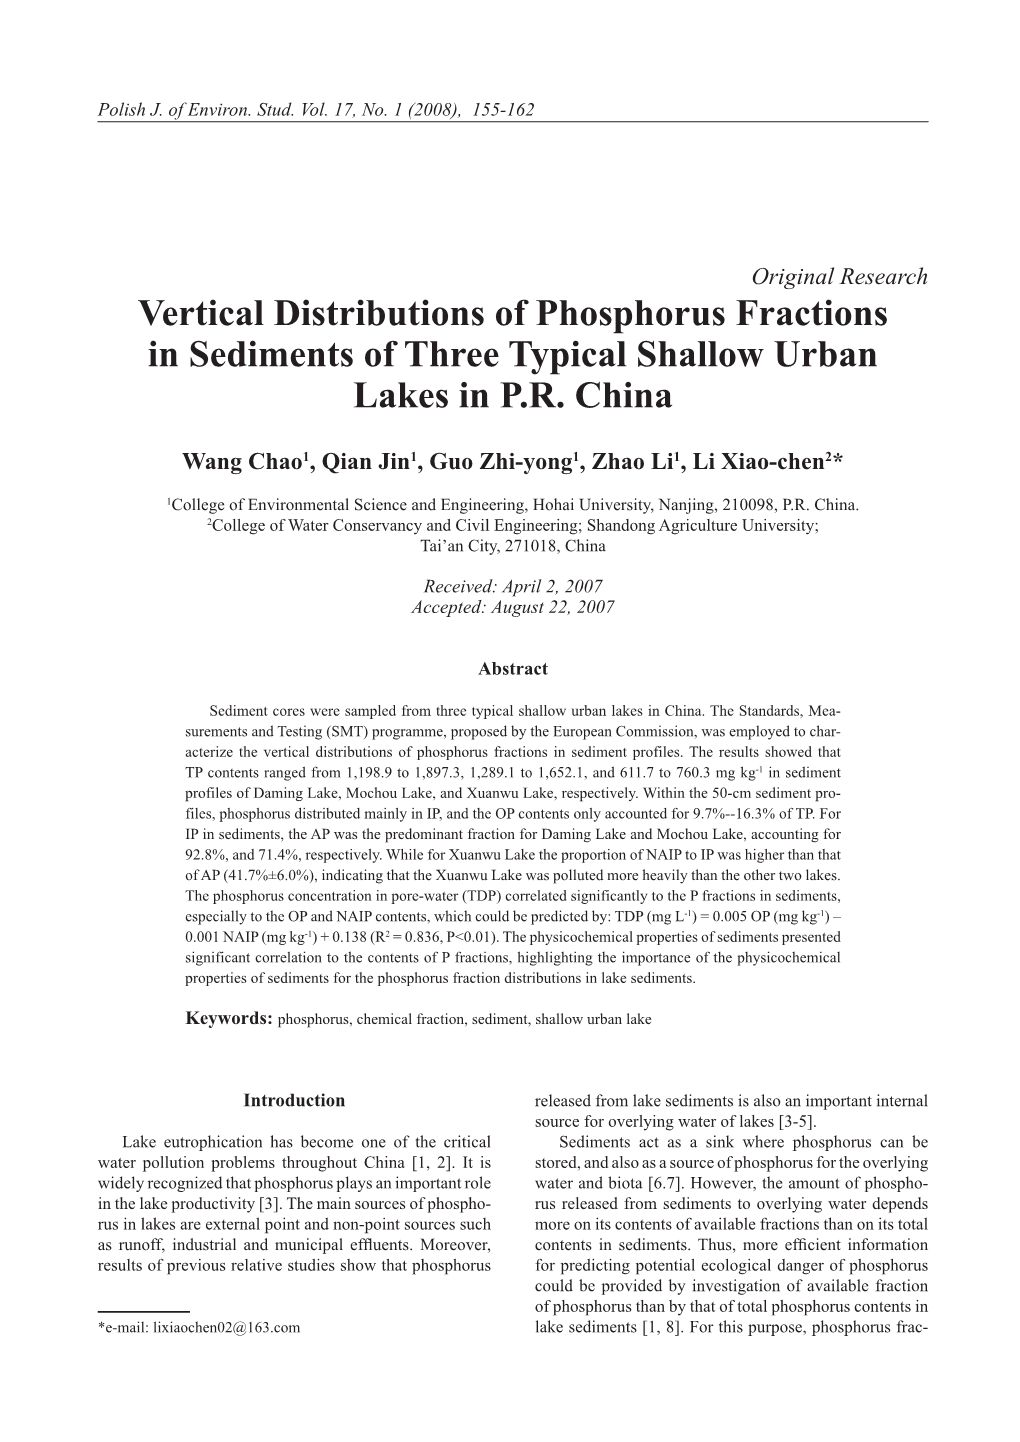 Vertical Distributions of Phosphorus Fractions in Sediments of Three Typical Shallow Urban Lakes in P.R